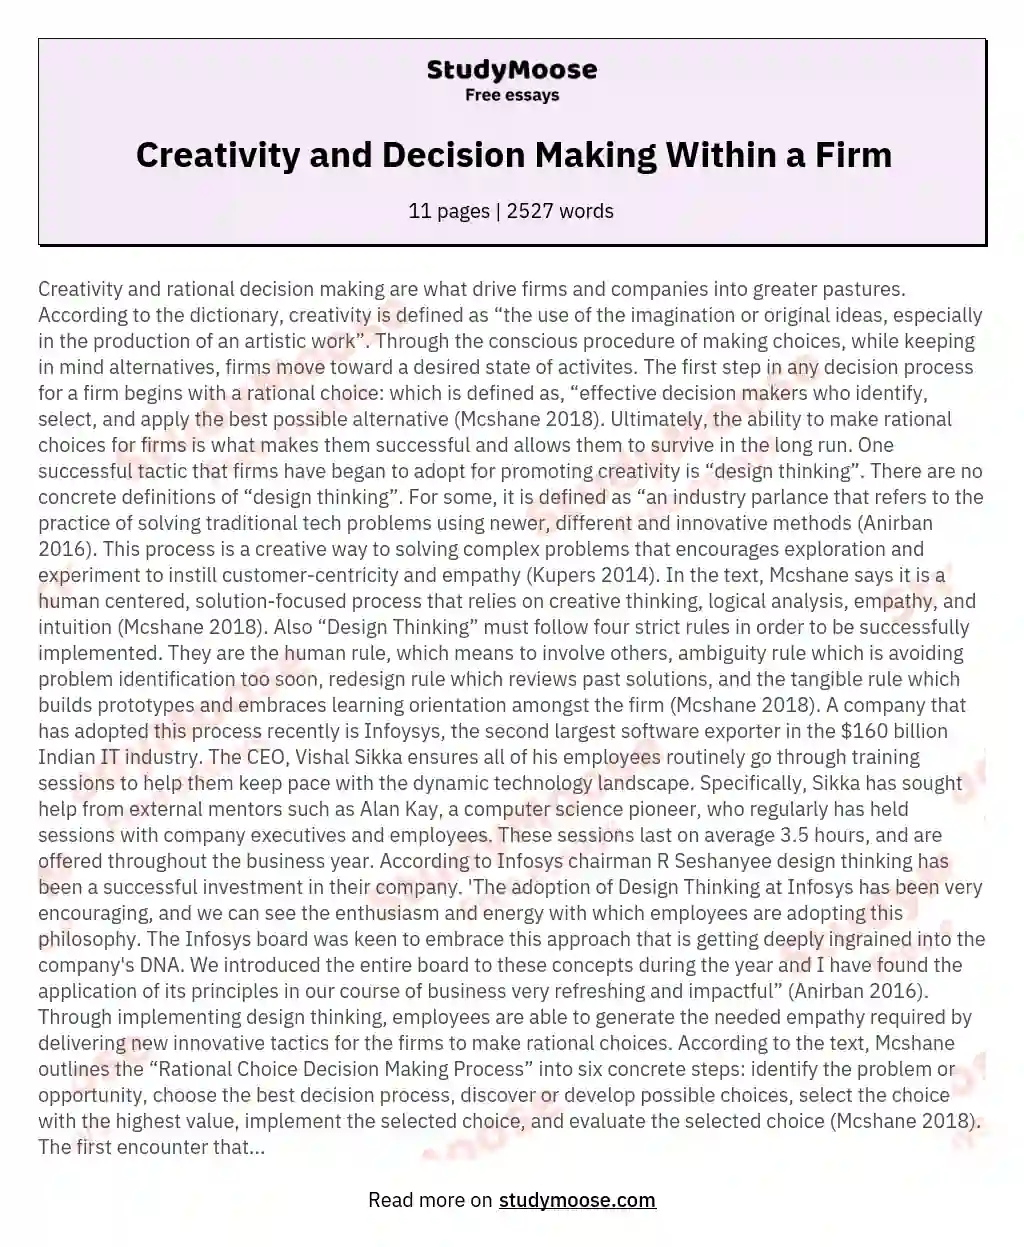 Creativity and Decision Making Within a Firm essay